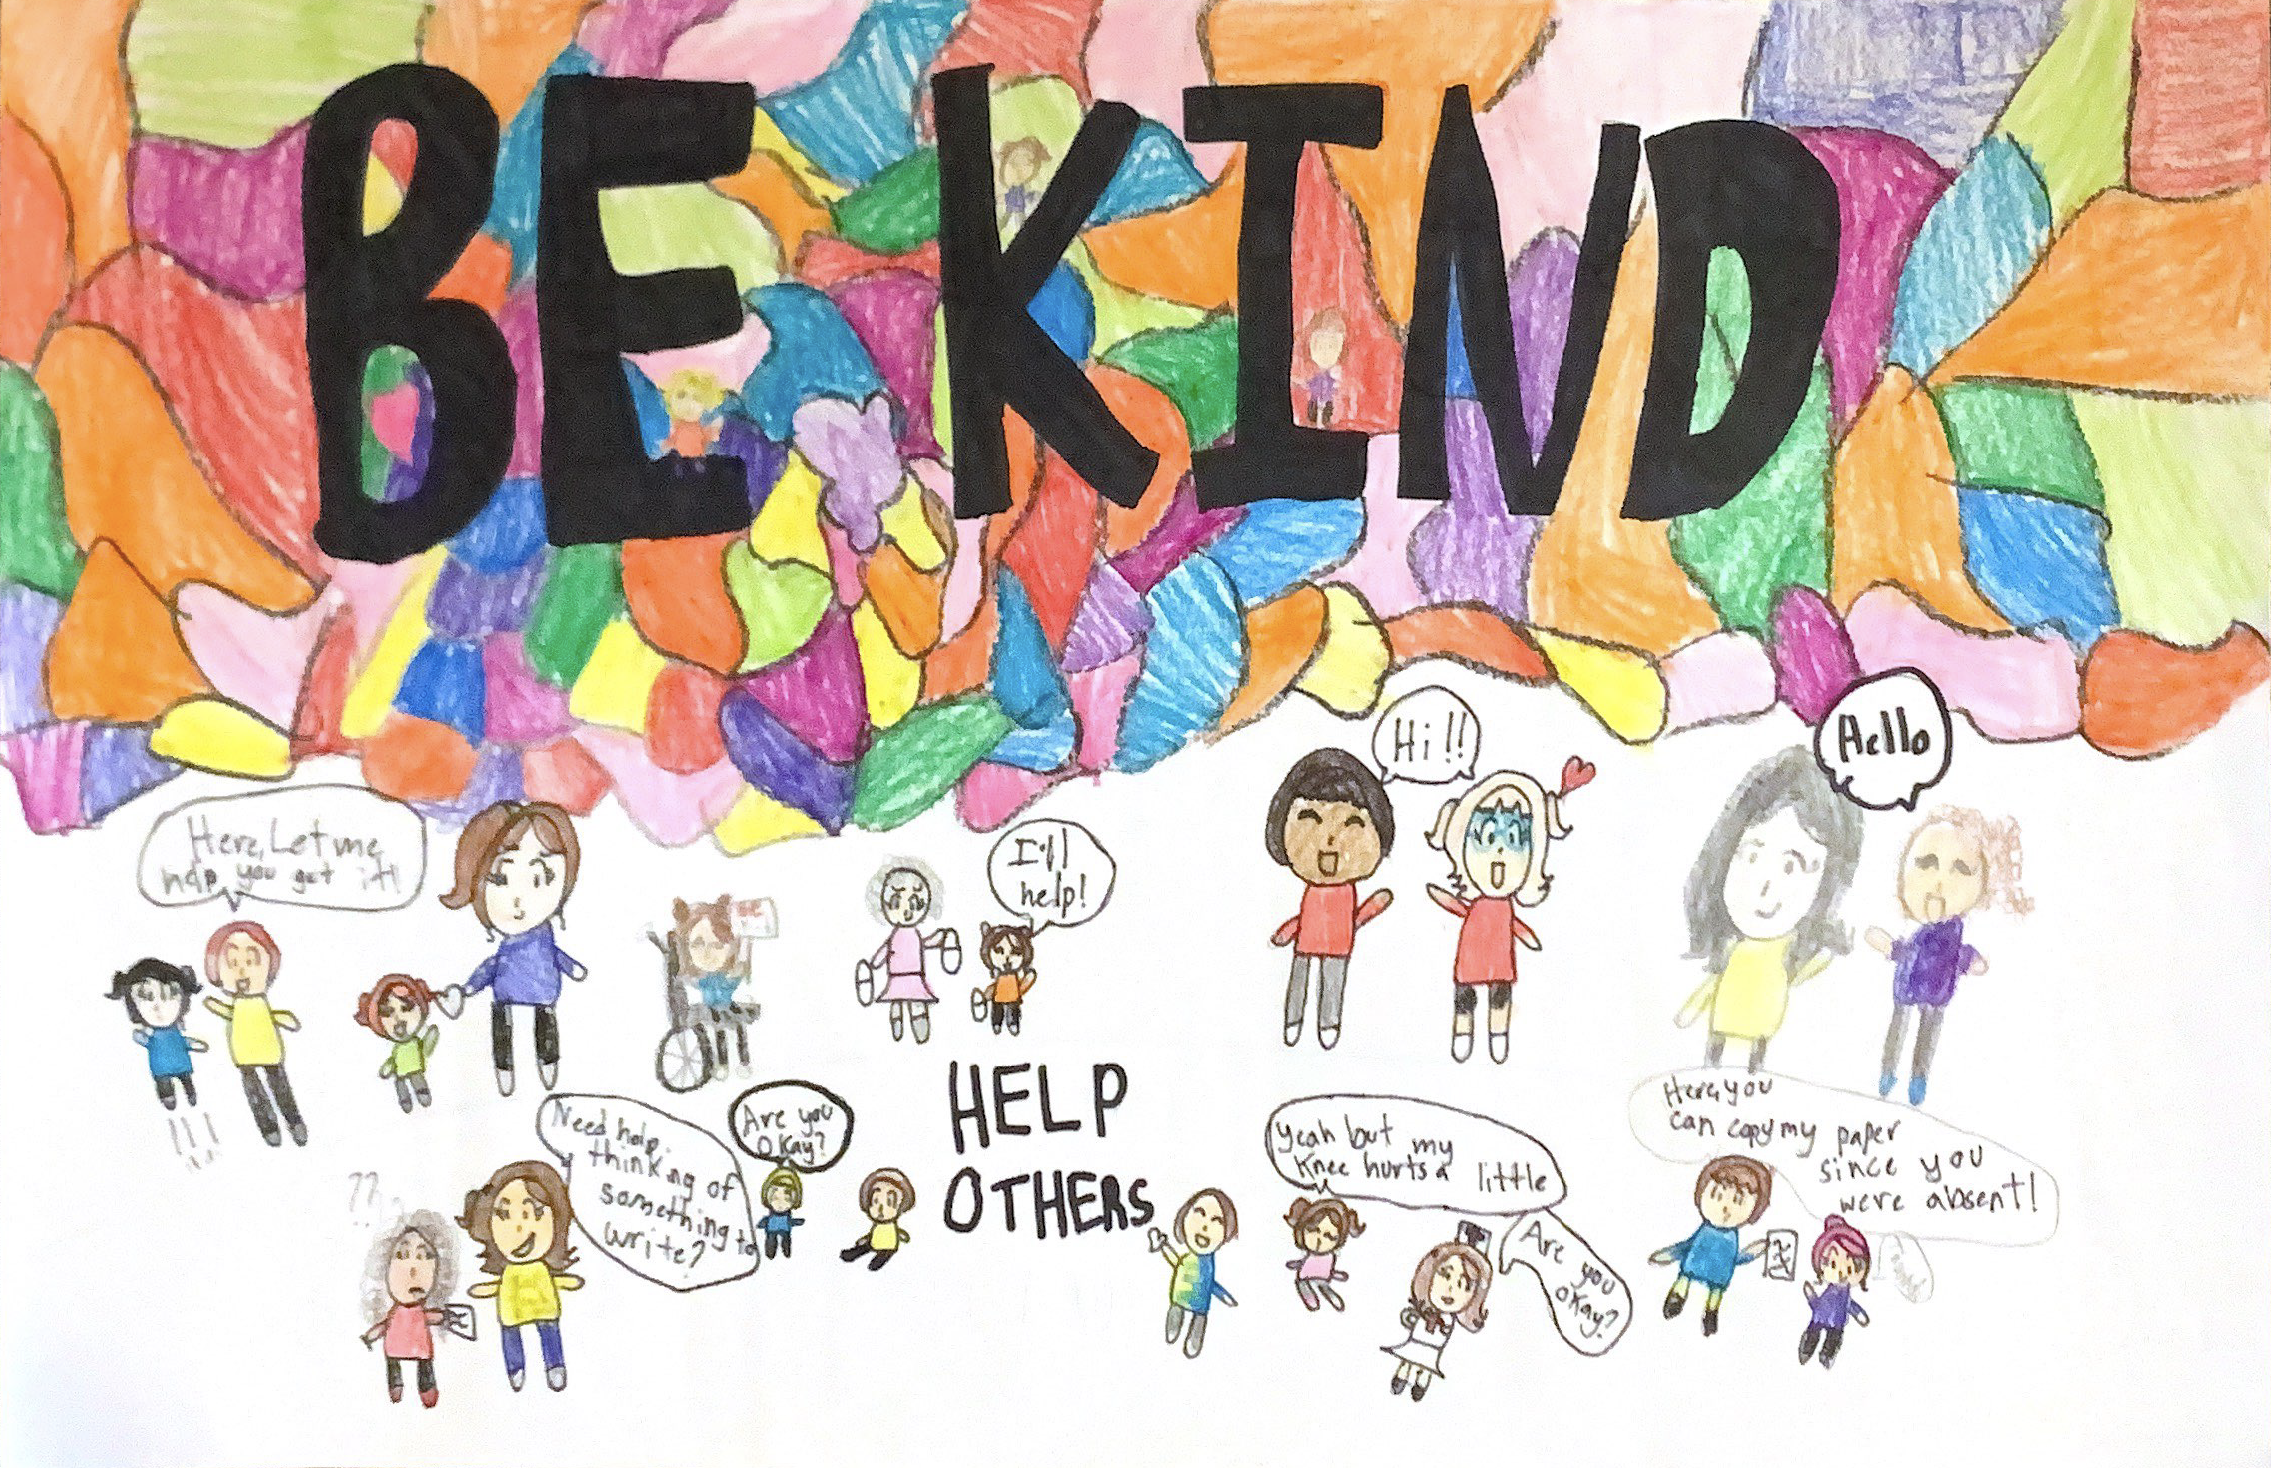 Audrina Stefanowicz, 4th Grade, Southern Columbia Area Elementary (Honorable Mention)